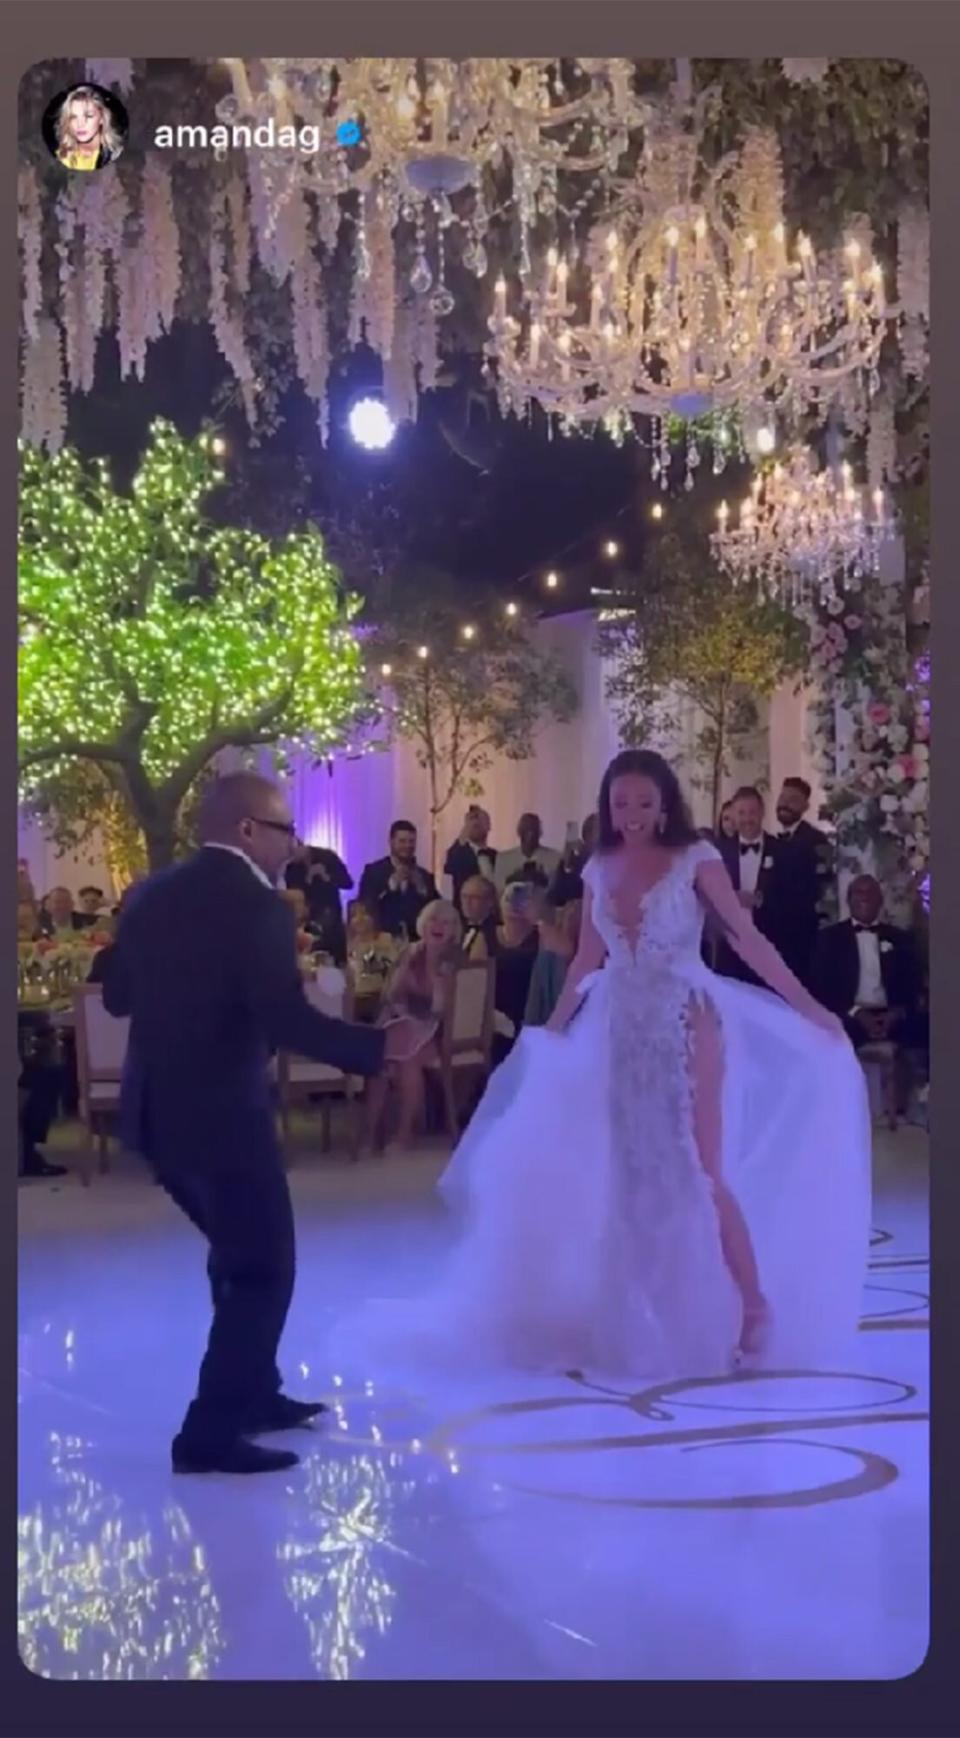 Eddie Murphy Shares Father-Daughter Dance with Daughter Bria at Her Wedding